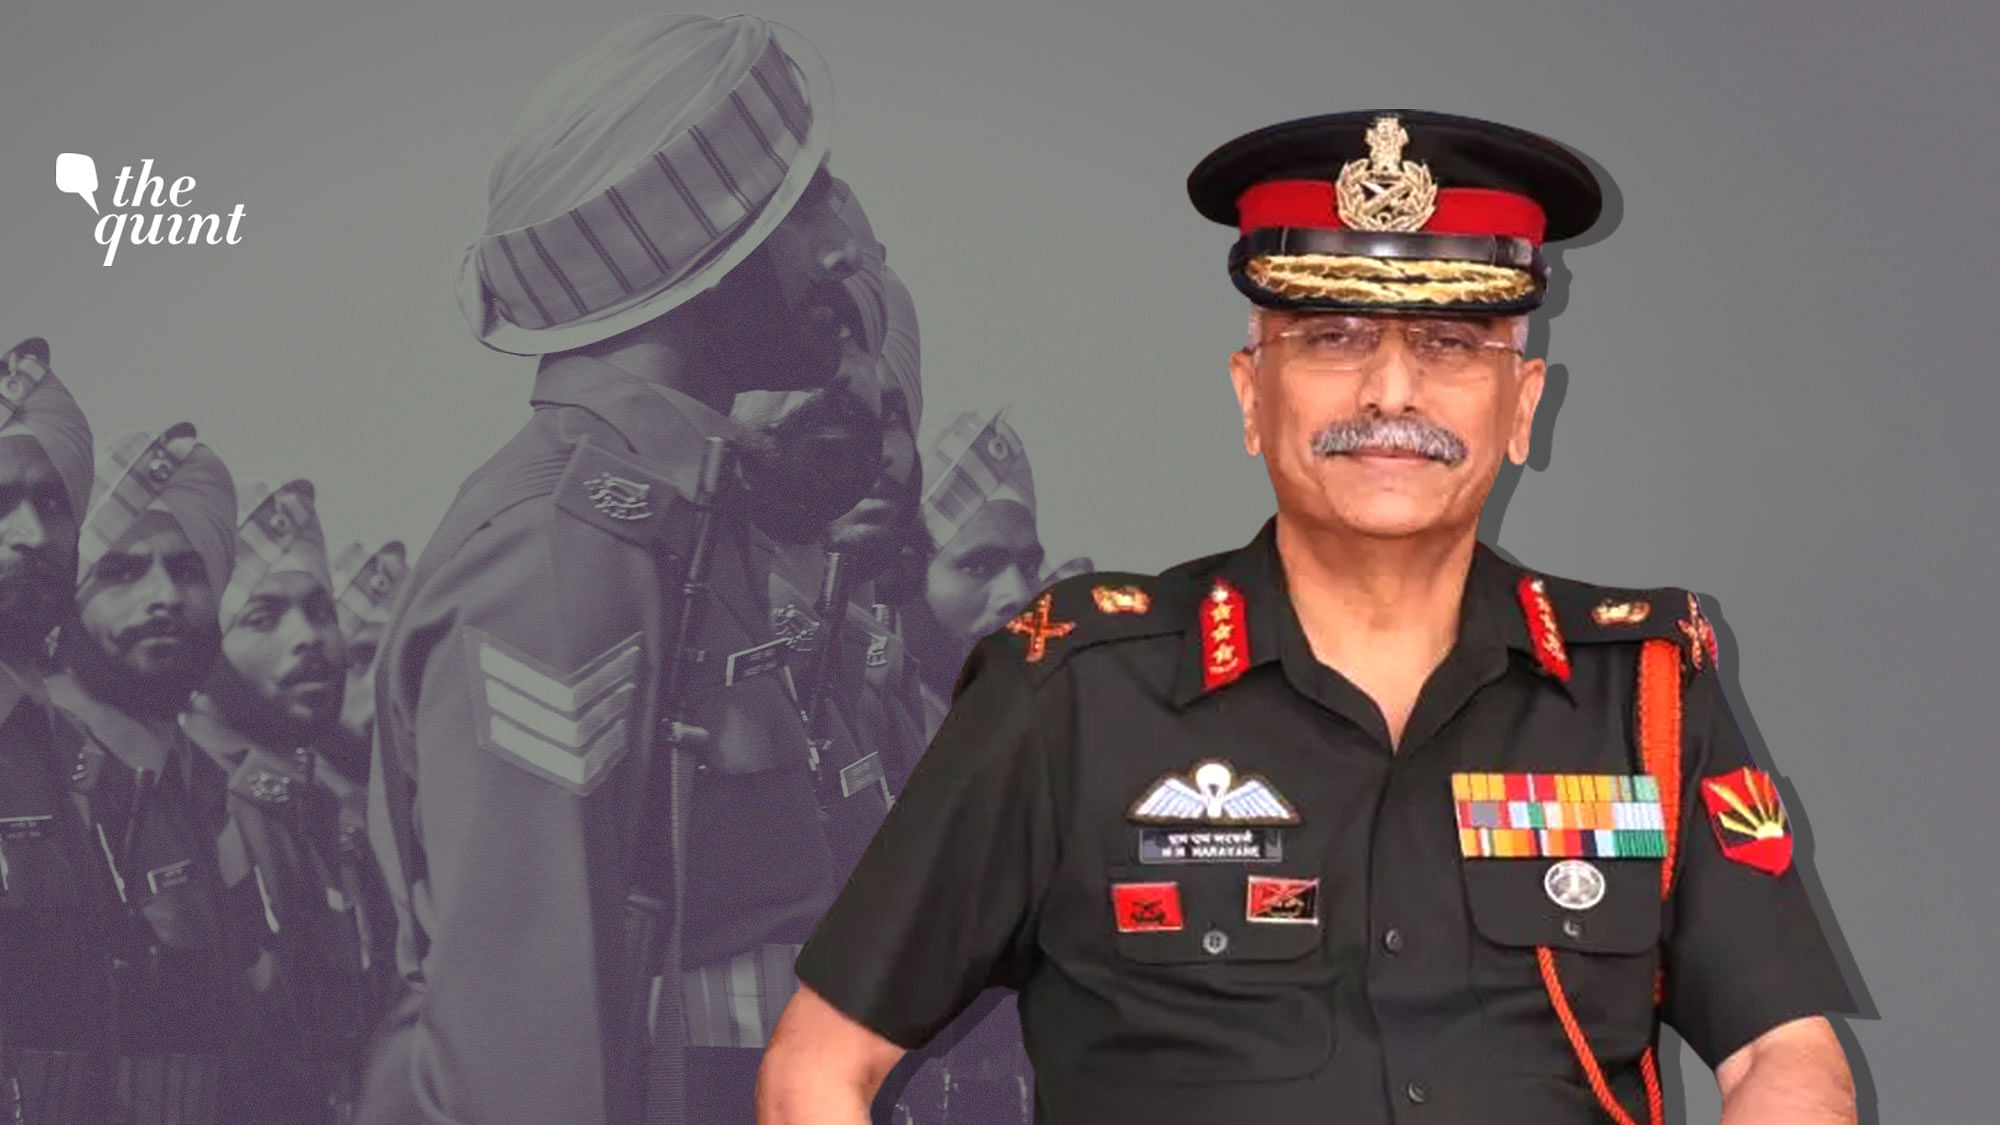 General Manoj Mukund Naravane has been appointed as the next Chief of Army Staff.